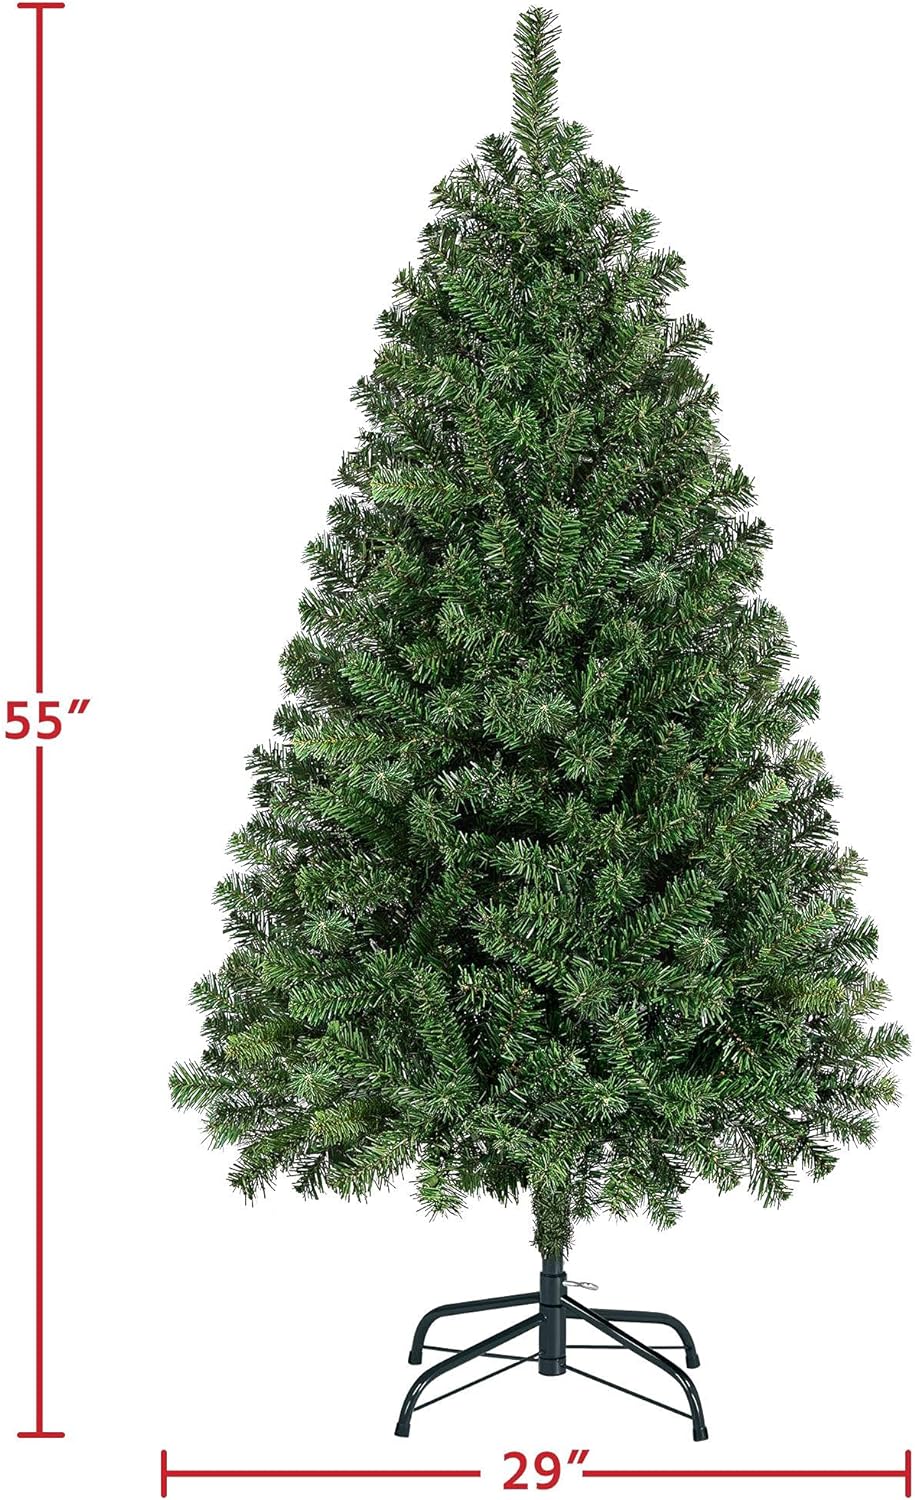 Yaheetech 7.5ft Prelit Artificial Hinged Christmas Pine Tree Prelighted Xmas Tree for Home Party Holiday Decoration with 550 Warm White Lights and 1354 Branch Tips